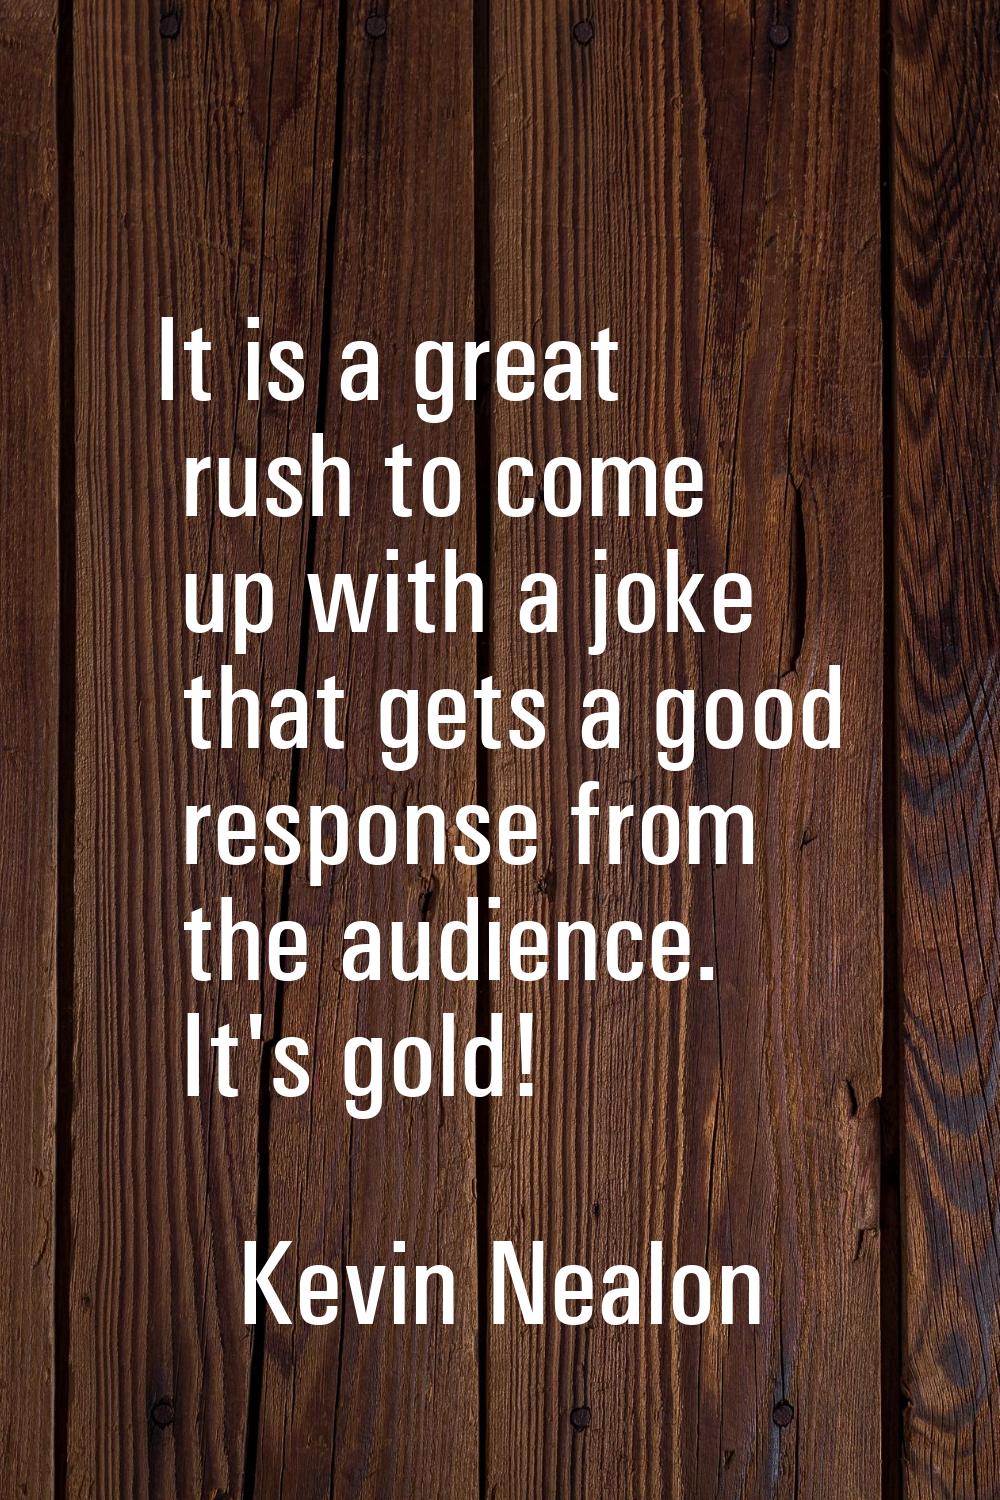 It is a great rush to come up with a joke that gets a good response from the audience. It's gold!